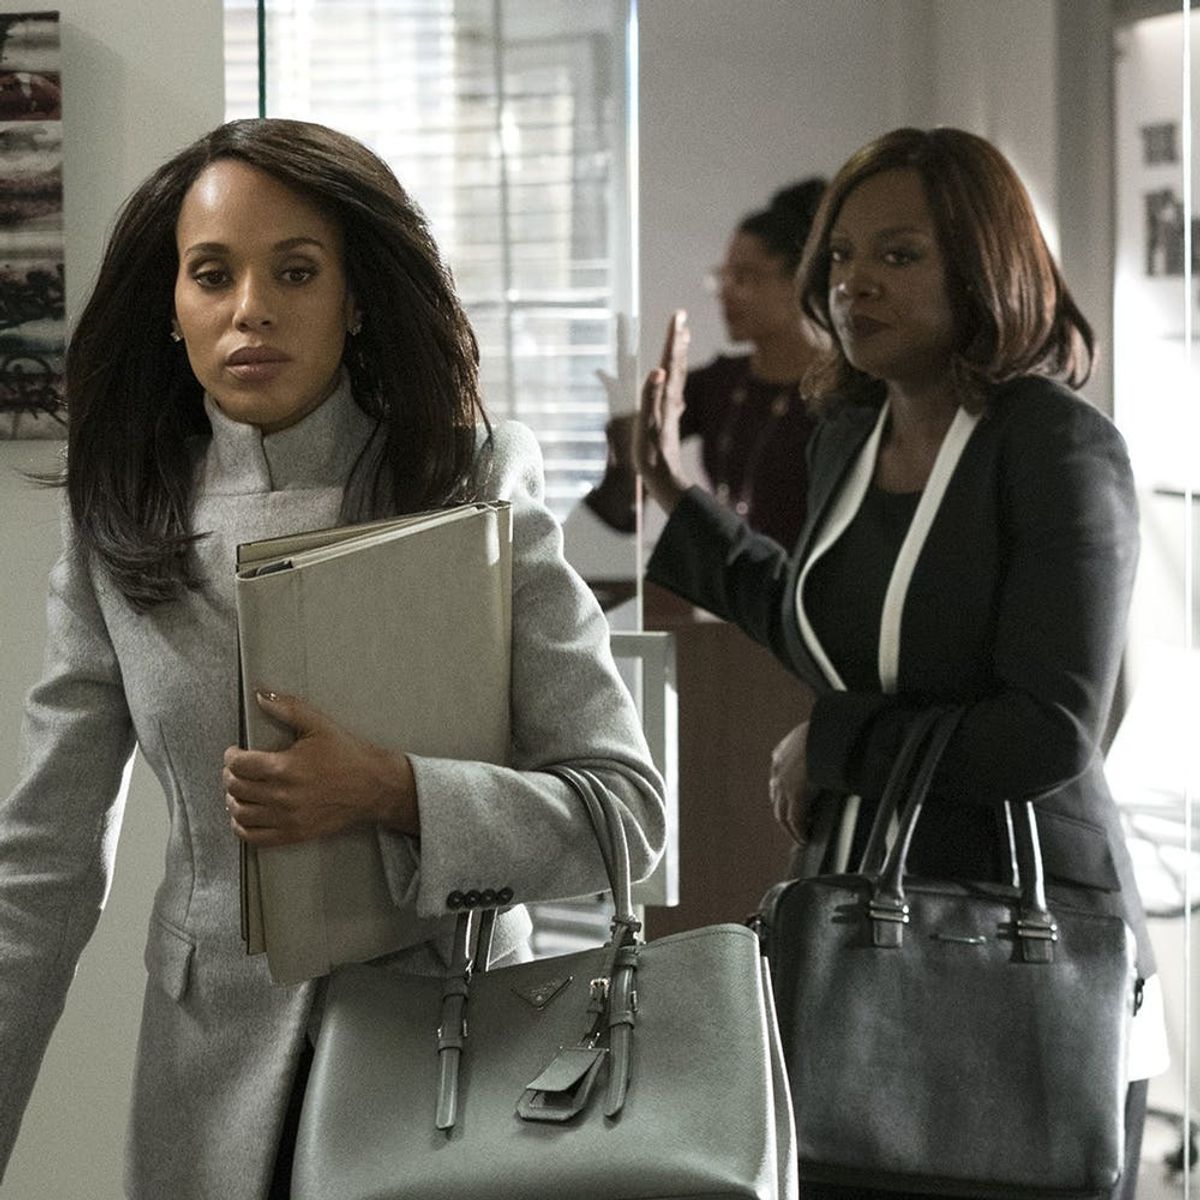 Watch a Sneak Peek of the ‘Scandal’ and ‘How to Get Away With Murder’ Crossover Episode